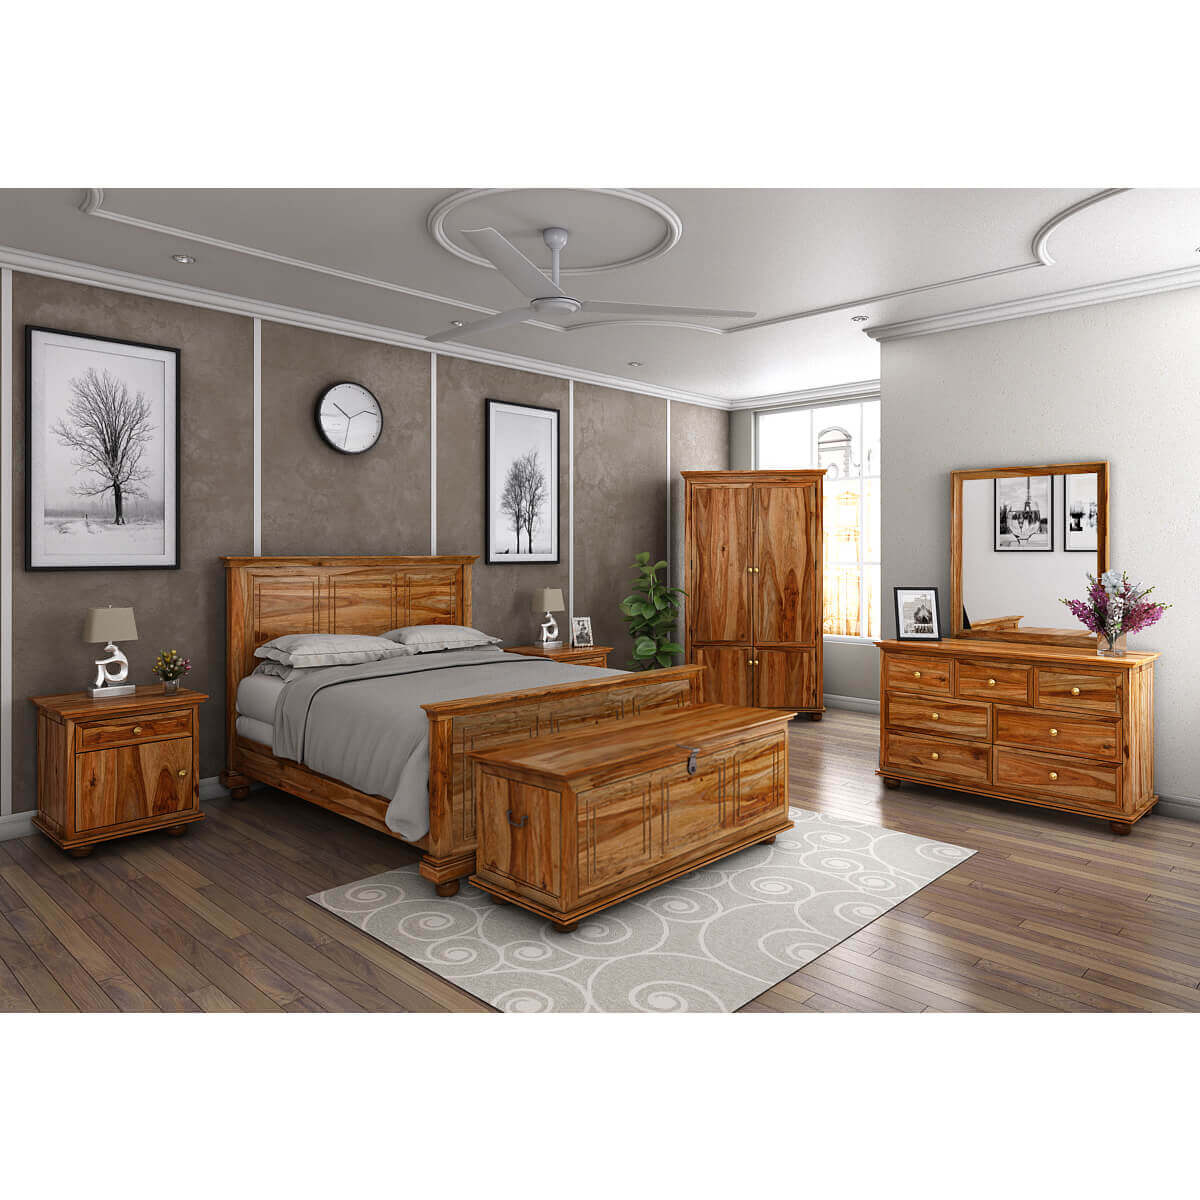 Pecos 7 Piece Bedroom Set intended for sizing 1200 X 1200